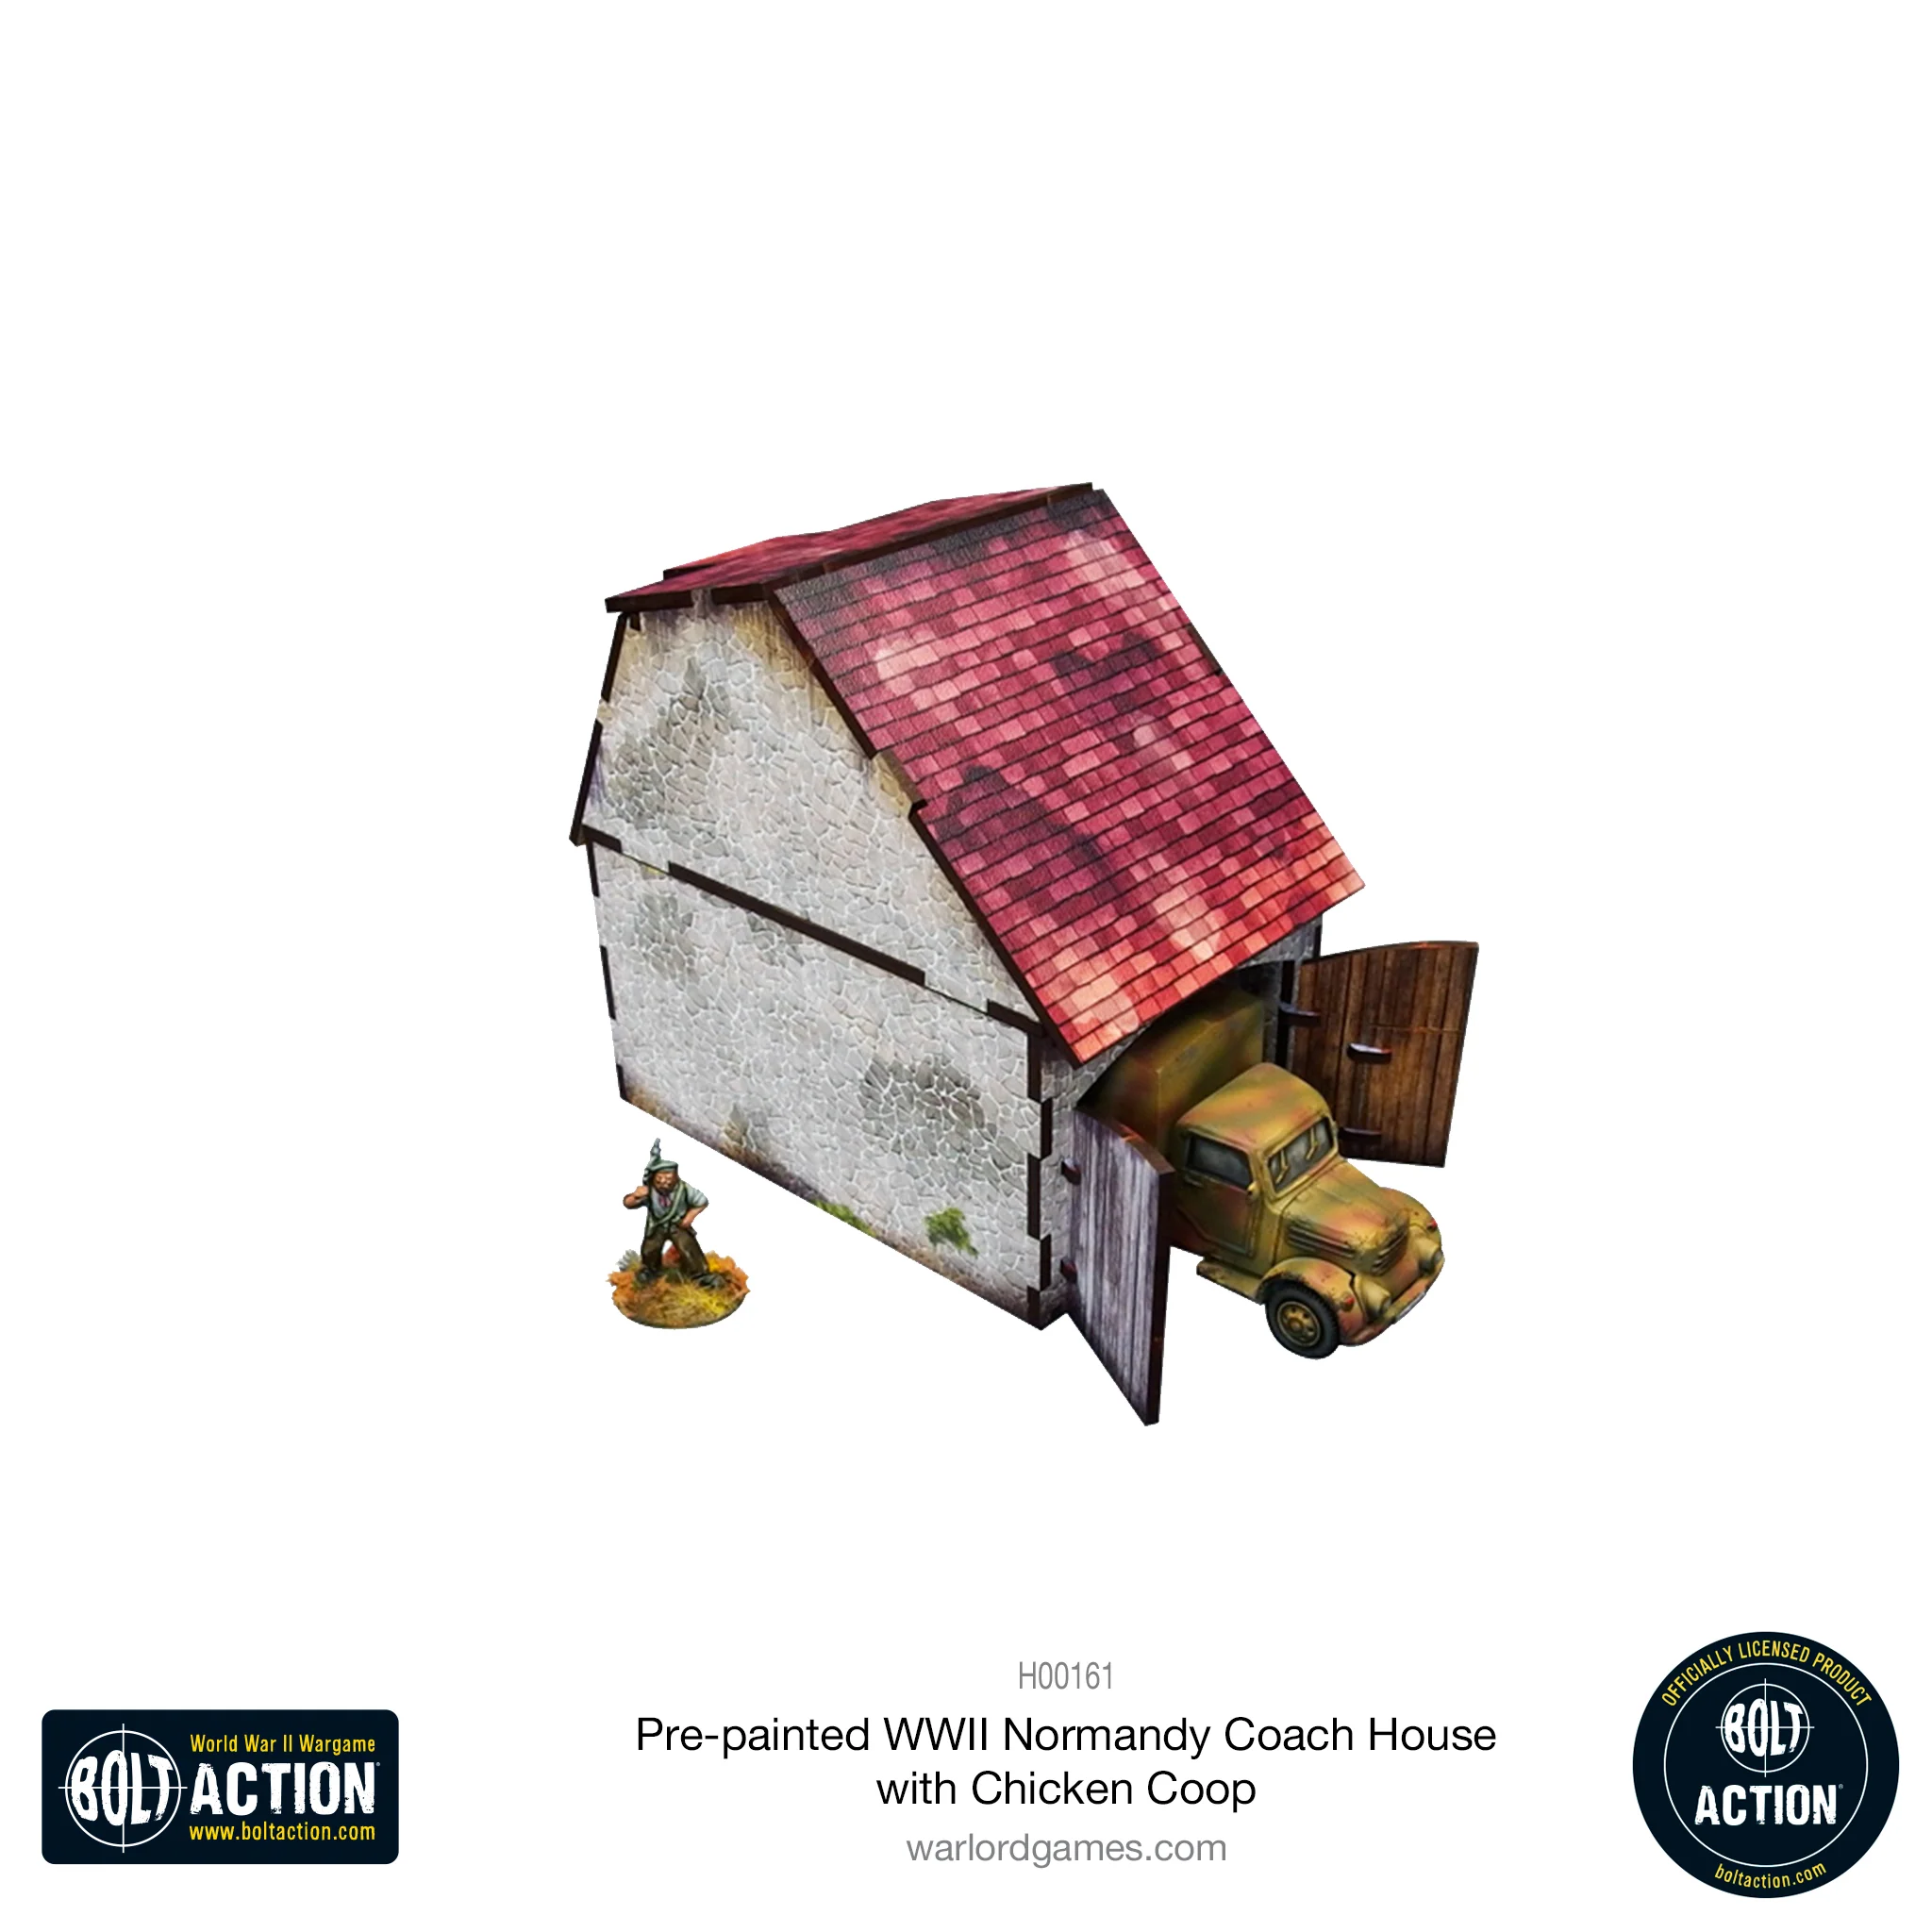 Bolt Action: Pre-Painted WWII Normandy Coach House With Chicken Coop-1711116715-2kEk7.webp